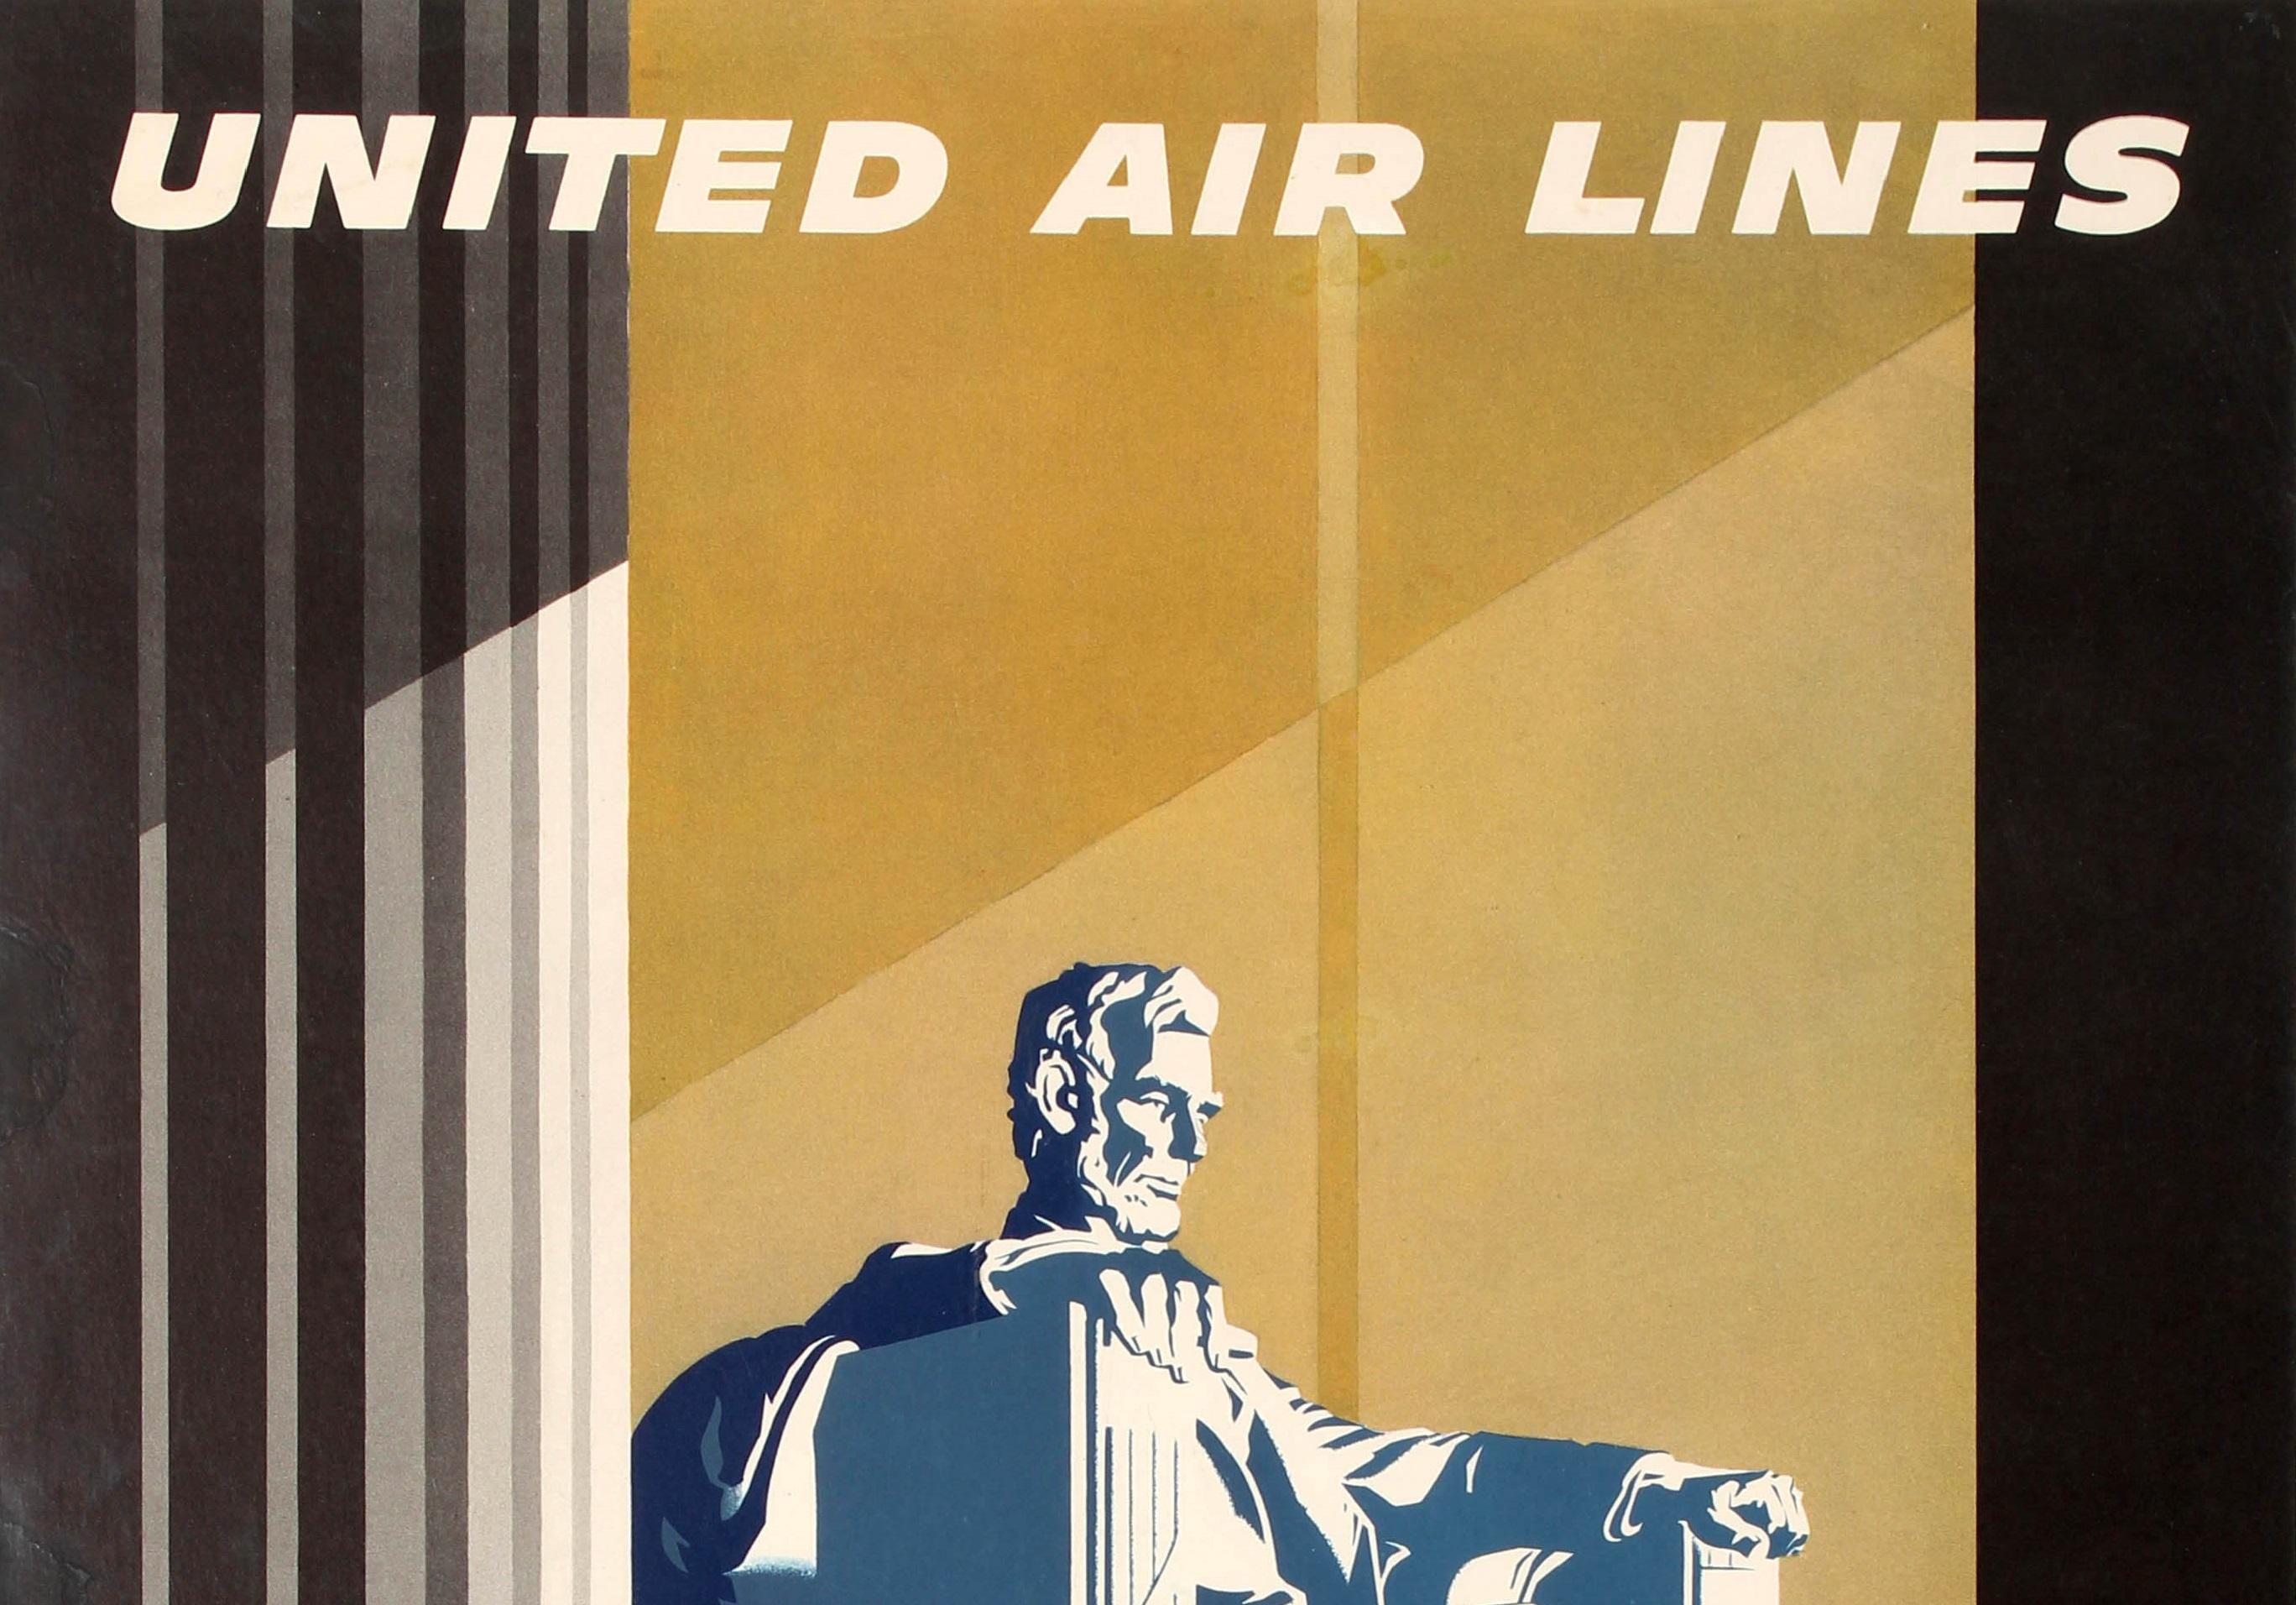 Original vintage travel poster for United Air Lines Washington D.C. Great artwork by Joseph Binder (1898-1972) featuring sunlight shining through the Lincoln Memorial pillars on the American politician Abraham Lincoln (1809-1865; President of the